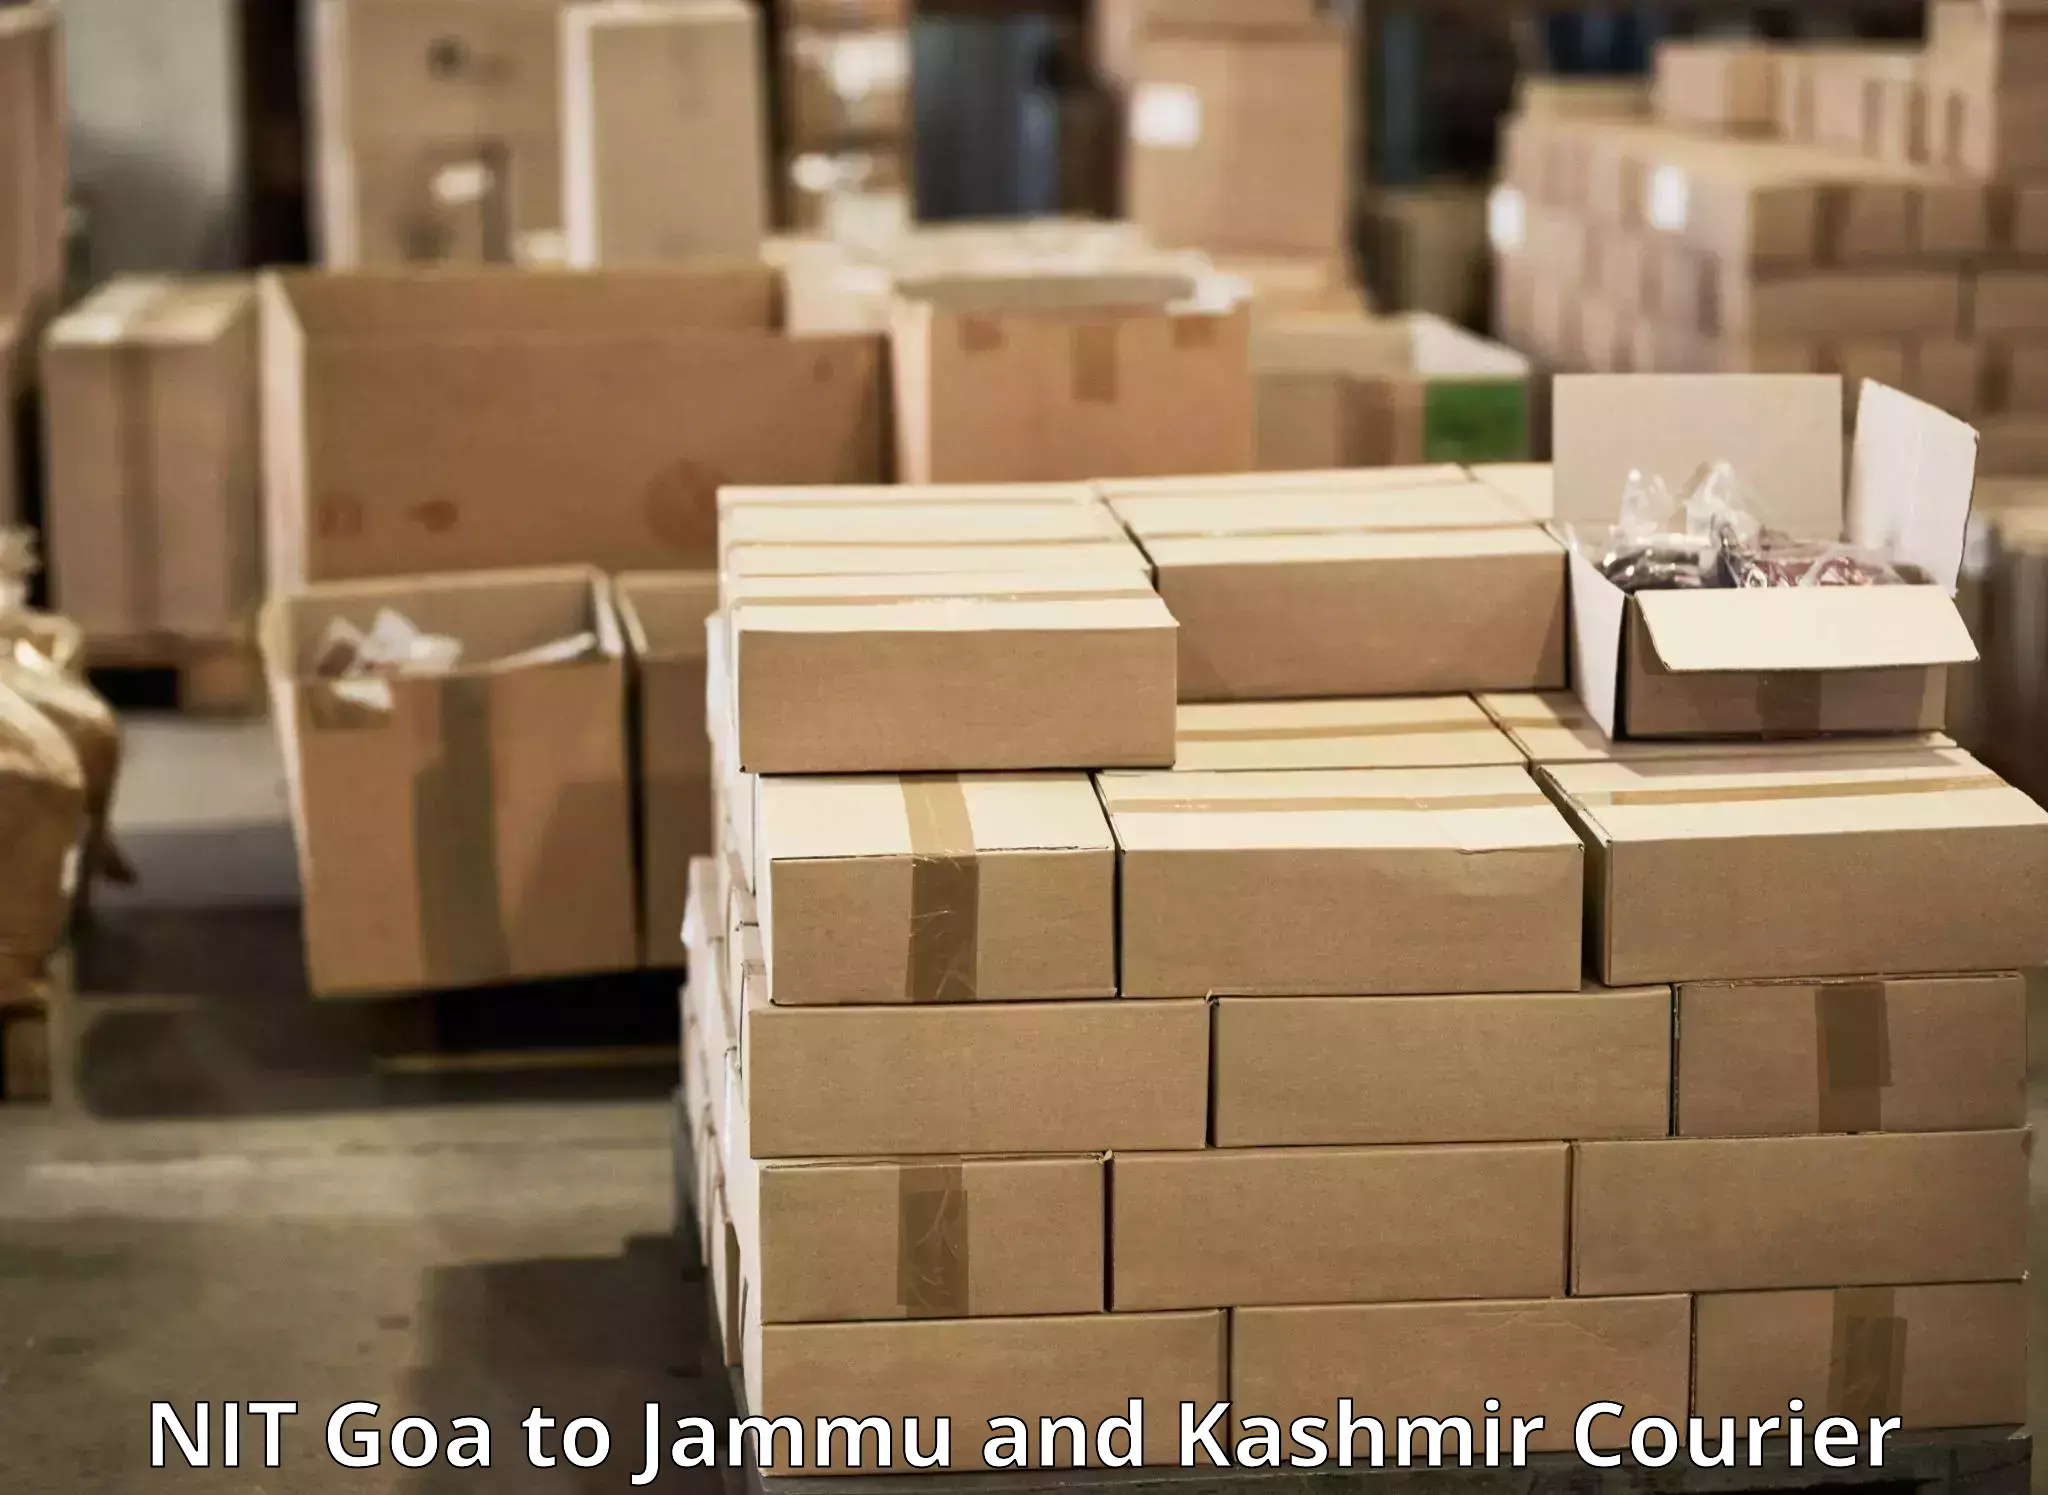 Cargo delivery service NIT Goa to Jammu and Kashmir